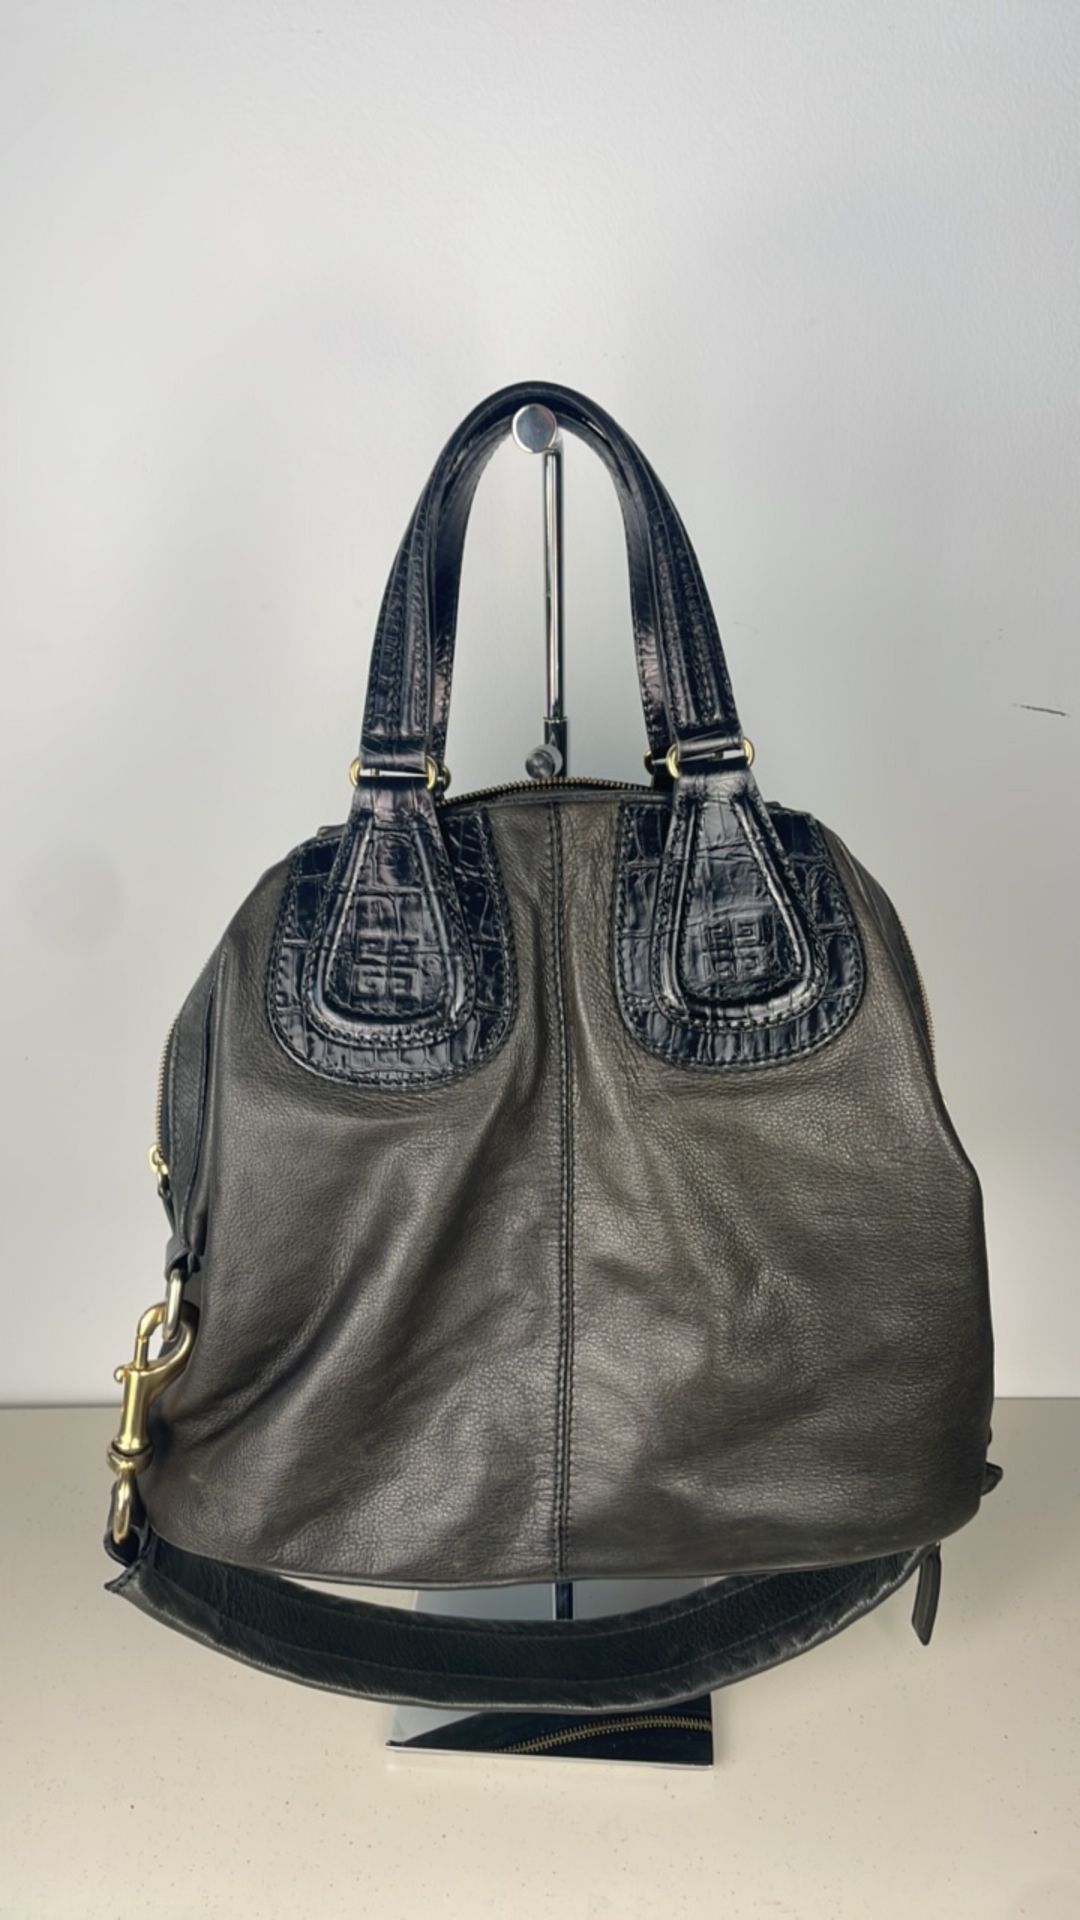 Tasche Givenchy - Image 3 of 3